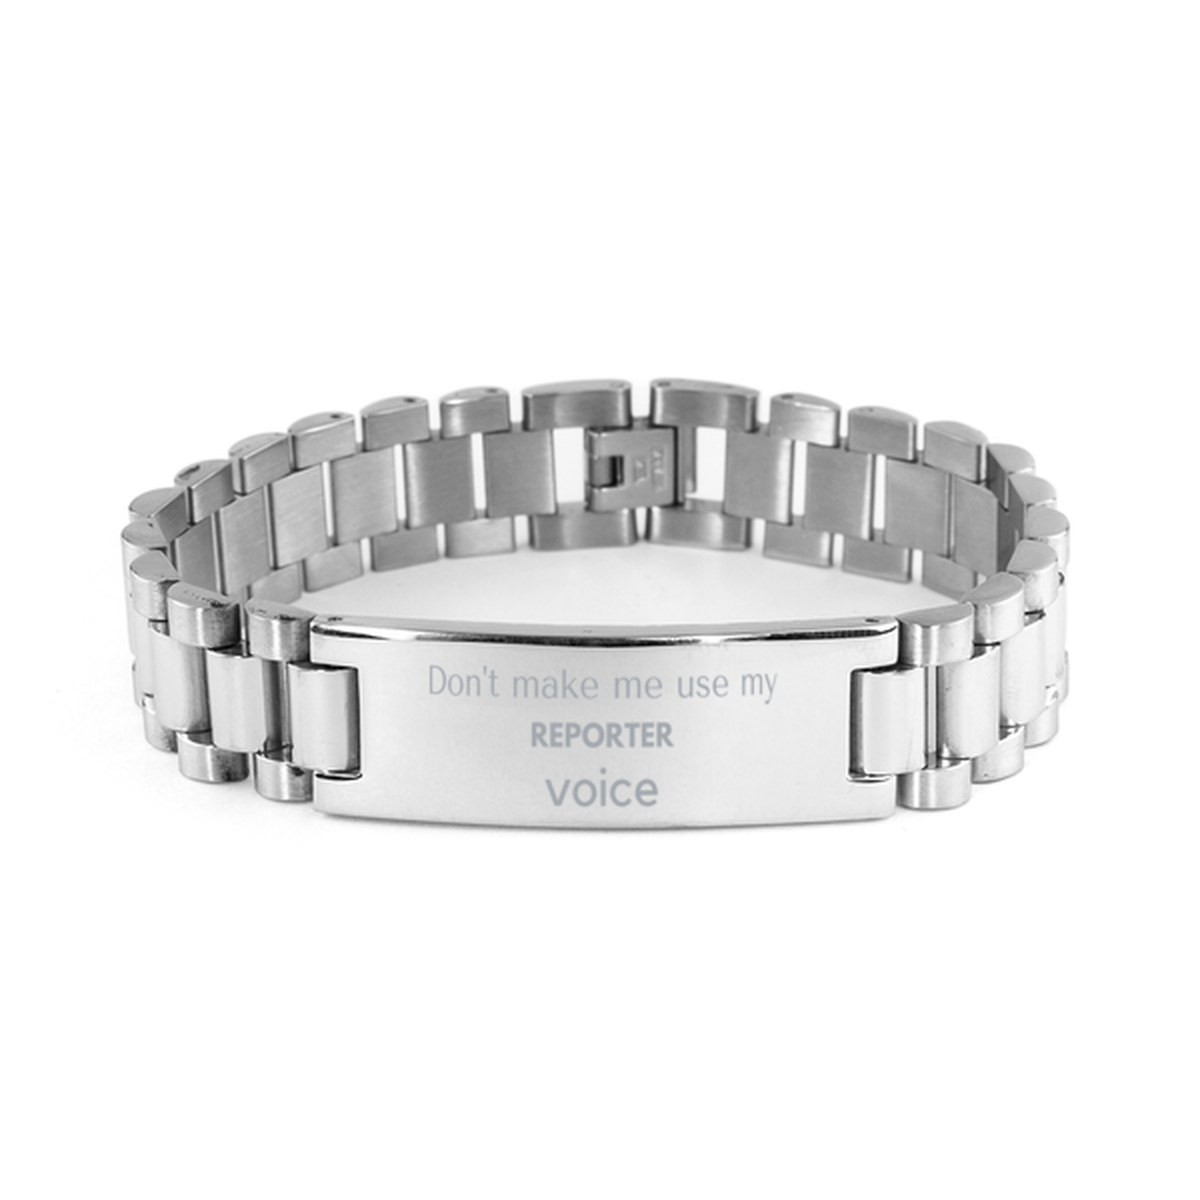 Don't make me use my Reporter voice, Sarcasm Reporter Gifts, Christmas Reporter Ladder Stainless Steel Bracelet Birthday Unique Gifts For Reporter Coworkers, Men, Women, Colleague, Friends